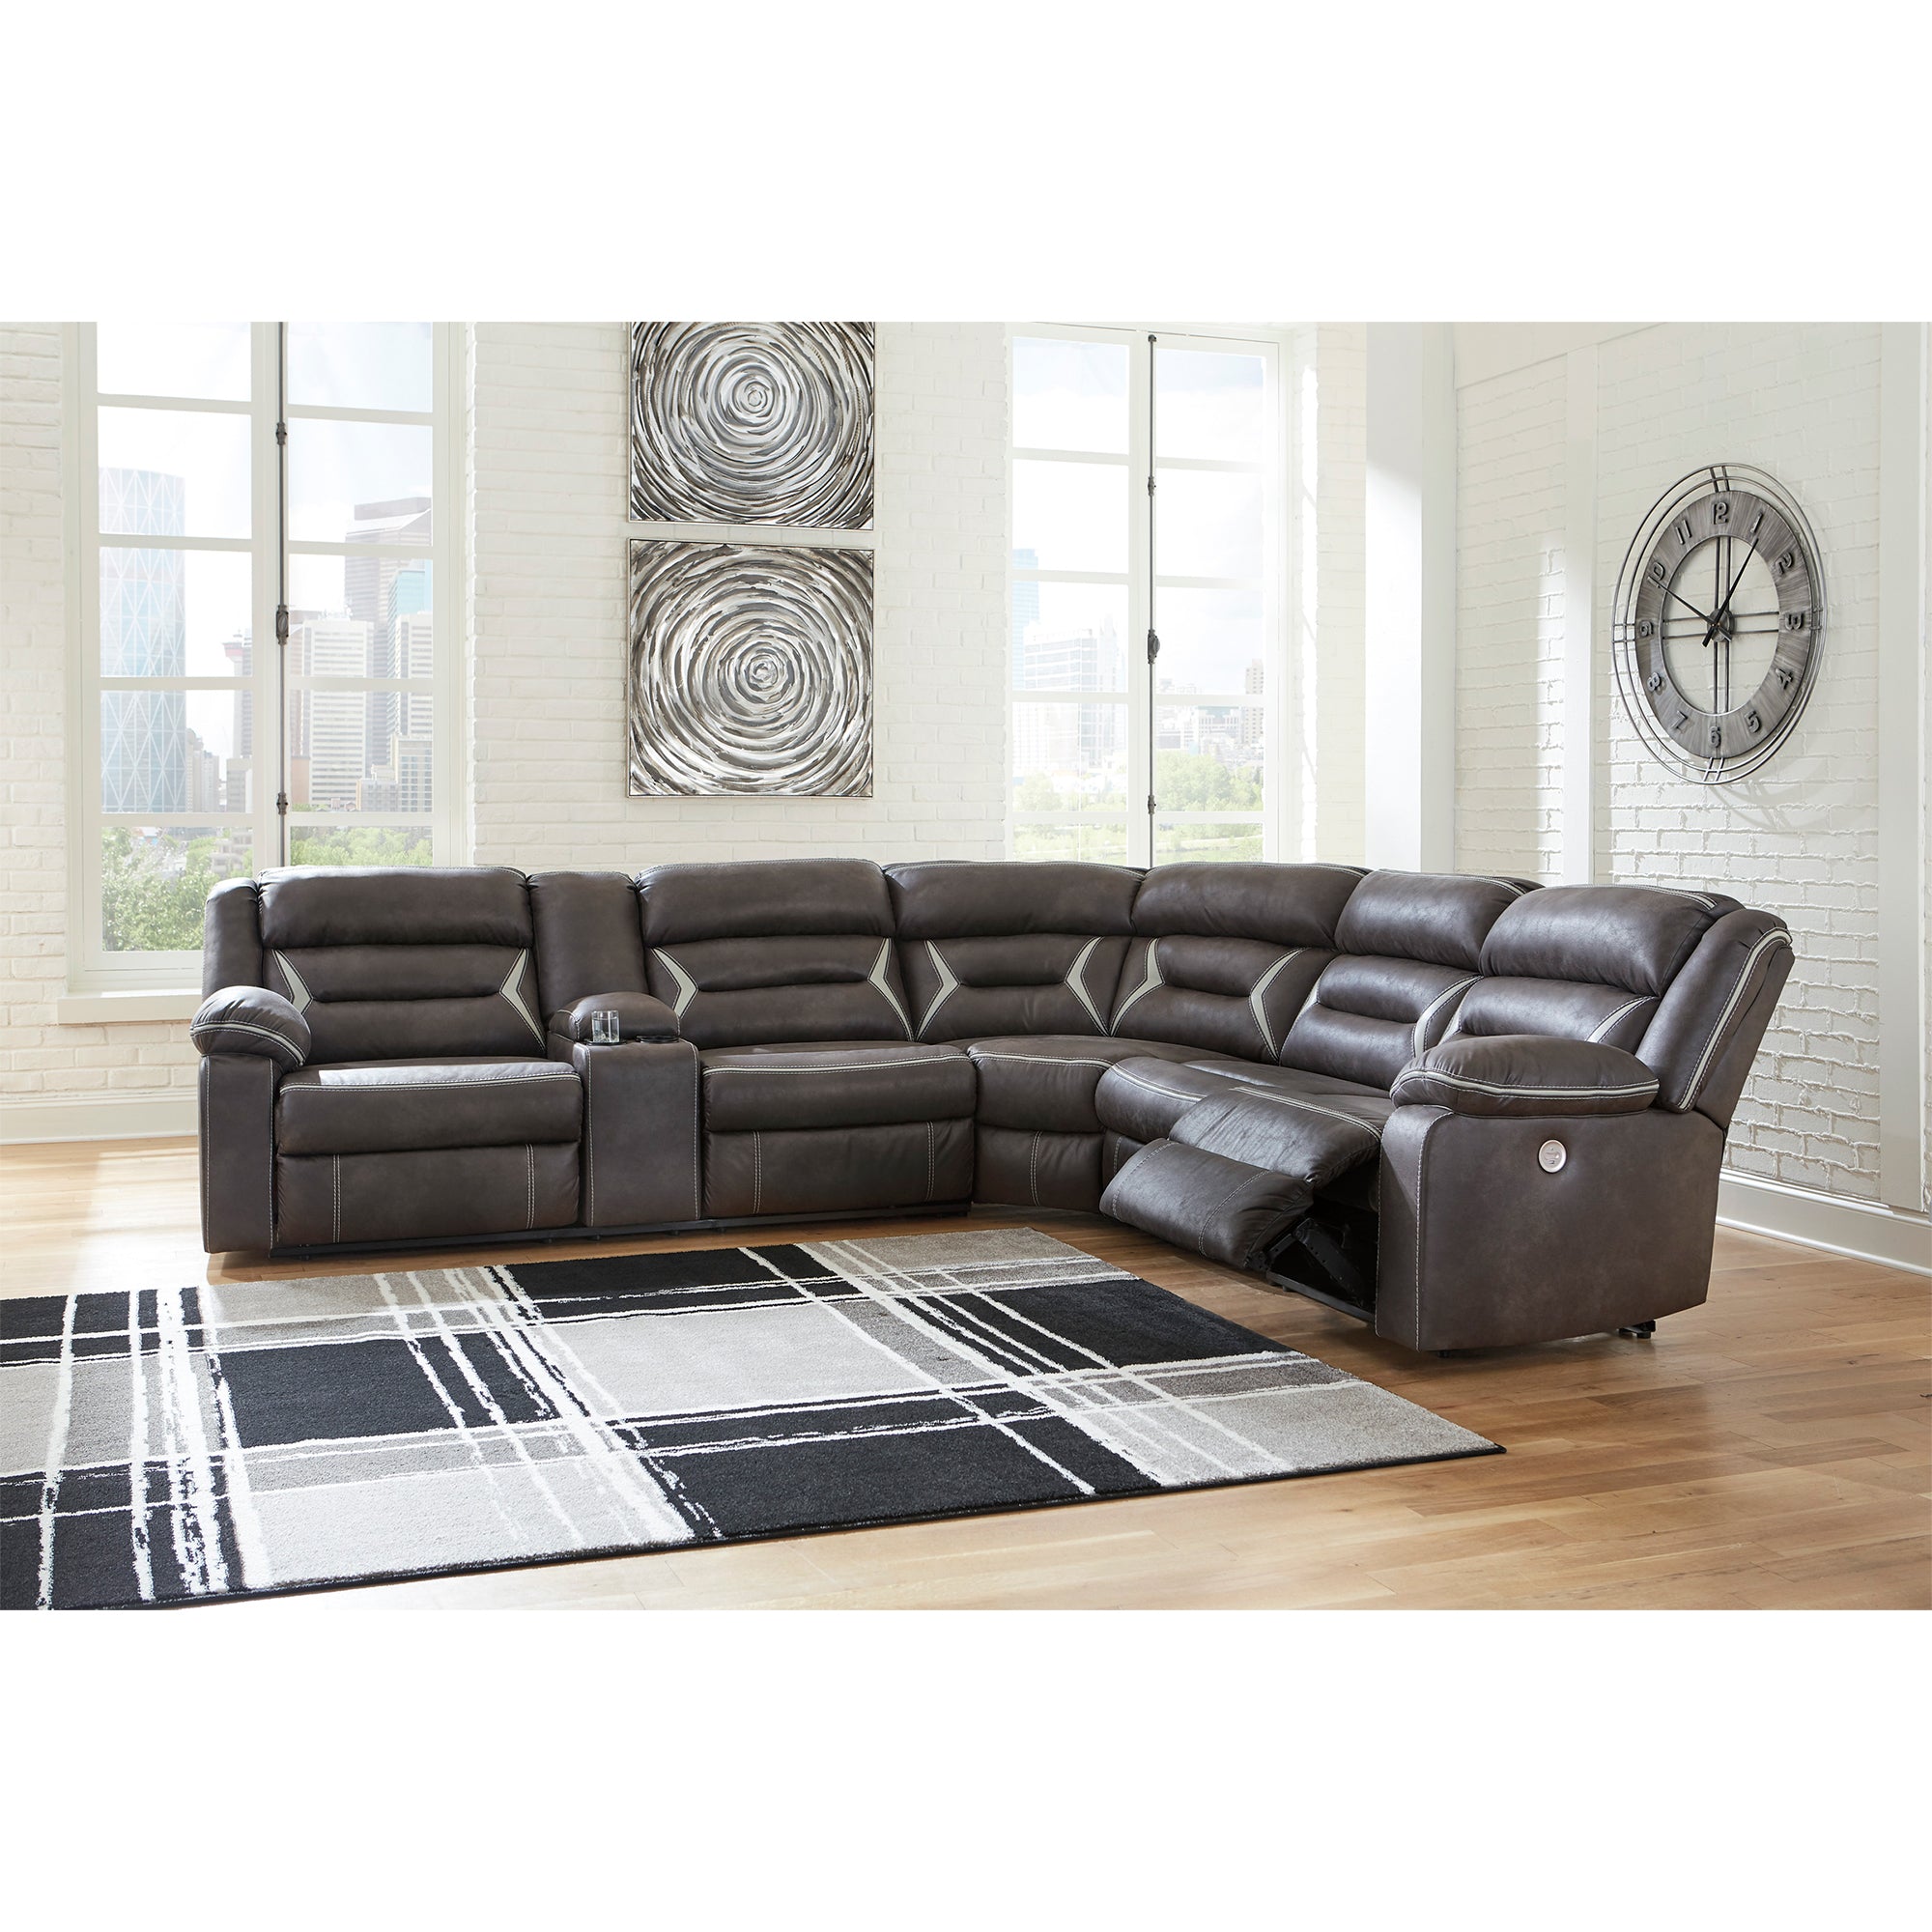 Kincord 4-Piece Power Reclining Sectional in Midnight Color